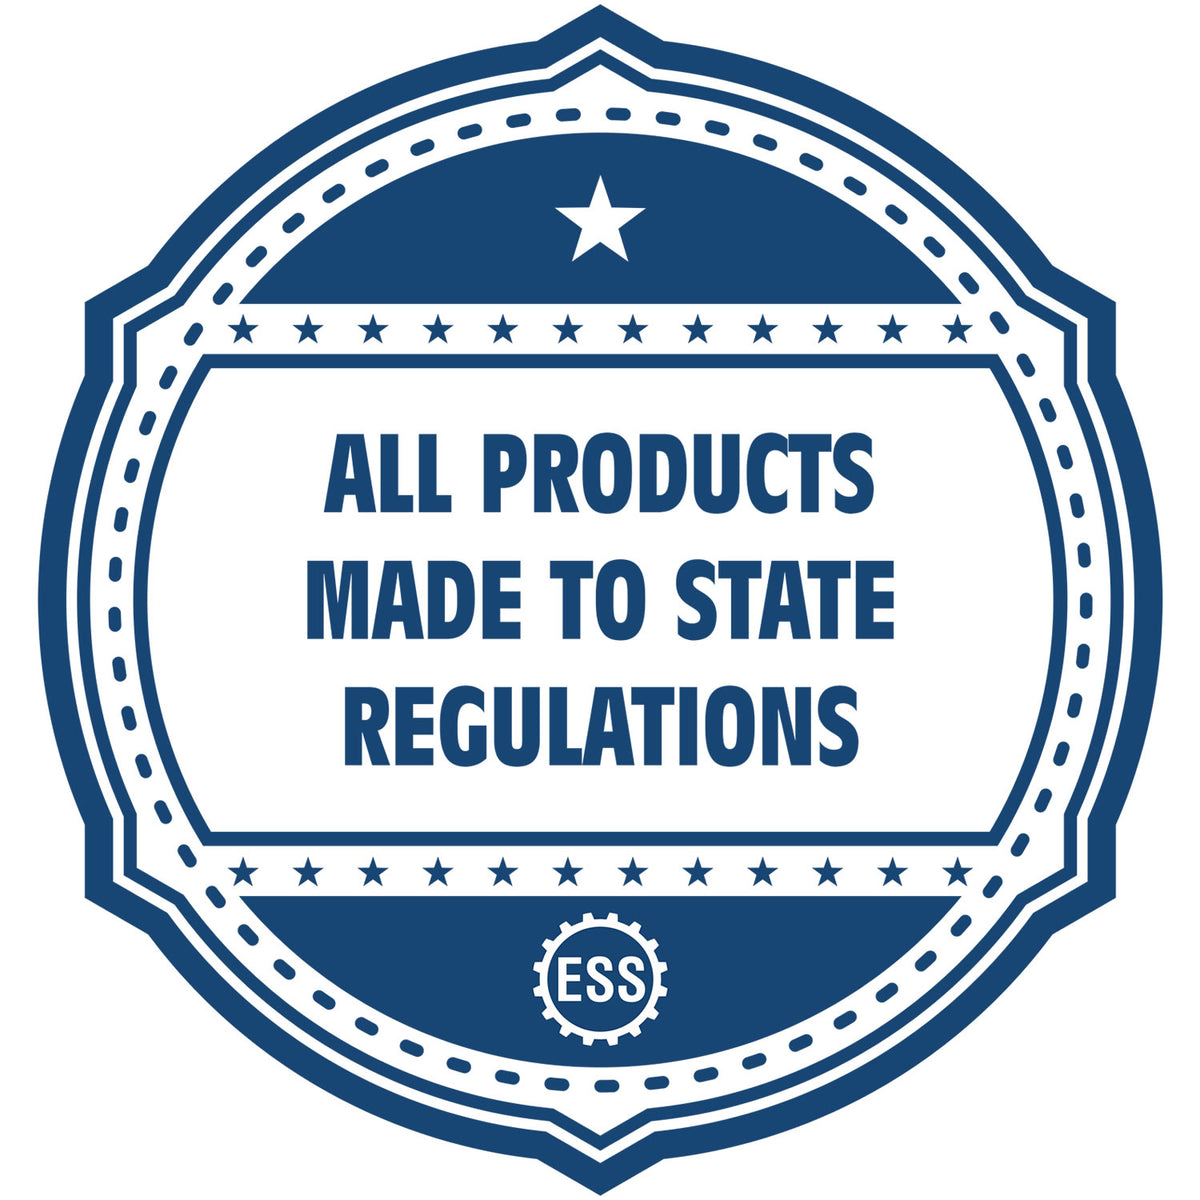 An icon or badge element for the Hawaii Desk Surveyor Seal Embosser showing that this product is made in compliance with state regulations.